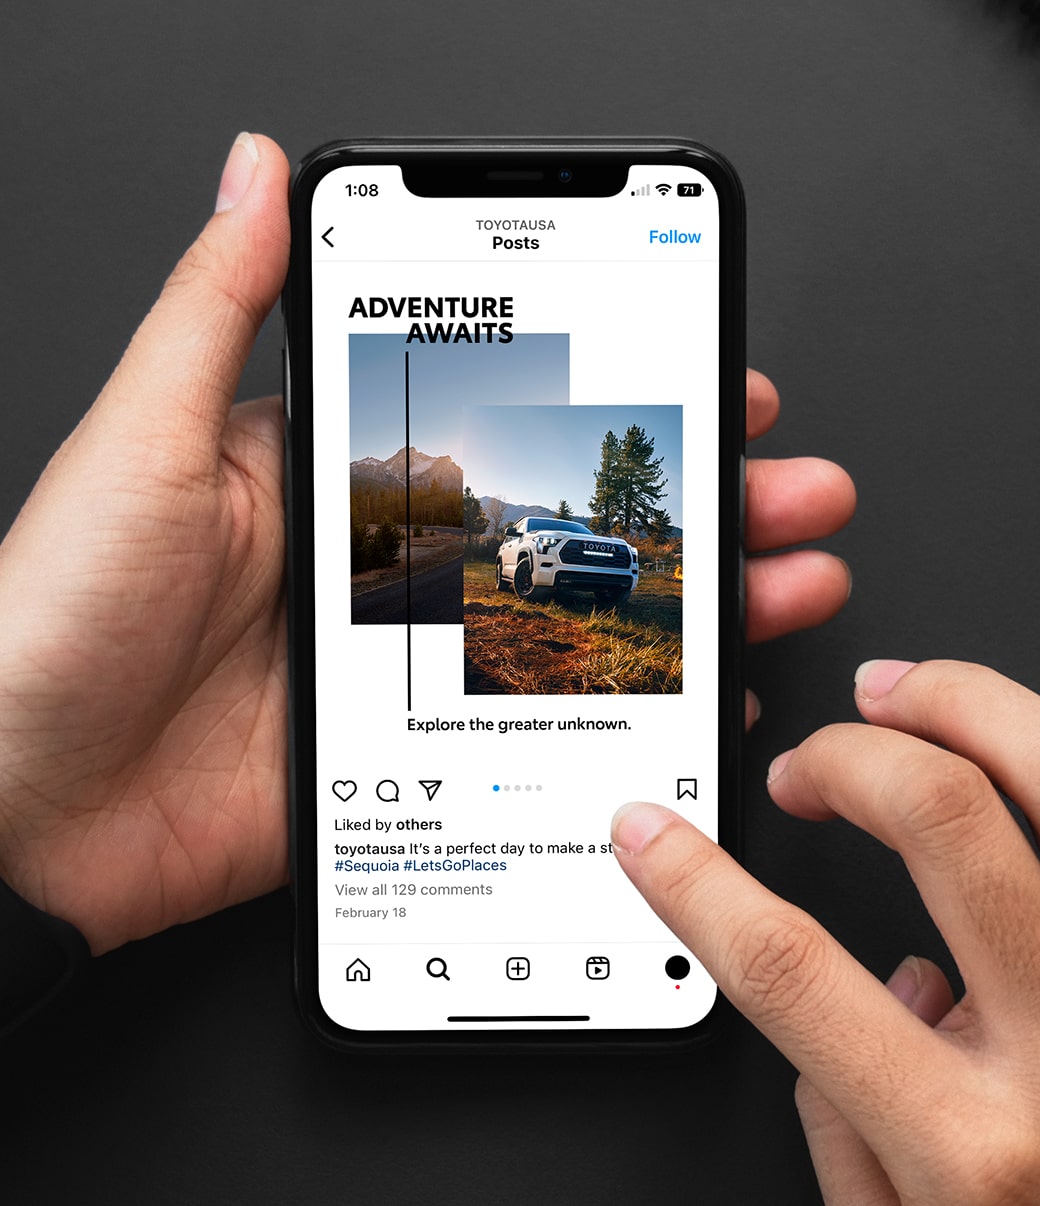 A slider divides an image of a hand holding a phone with a Toyota social media post. The slider moves back and forth to show a layout grid of the post and then the finished post with imagery.